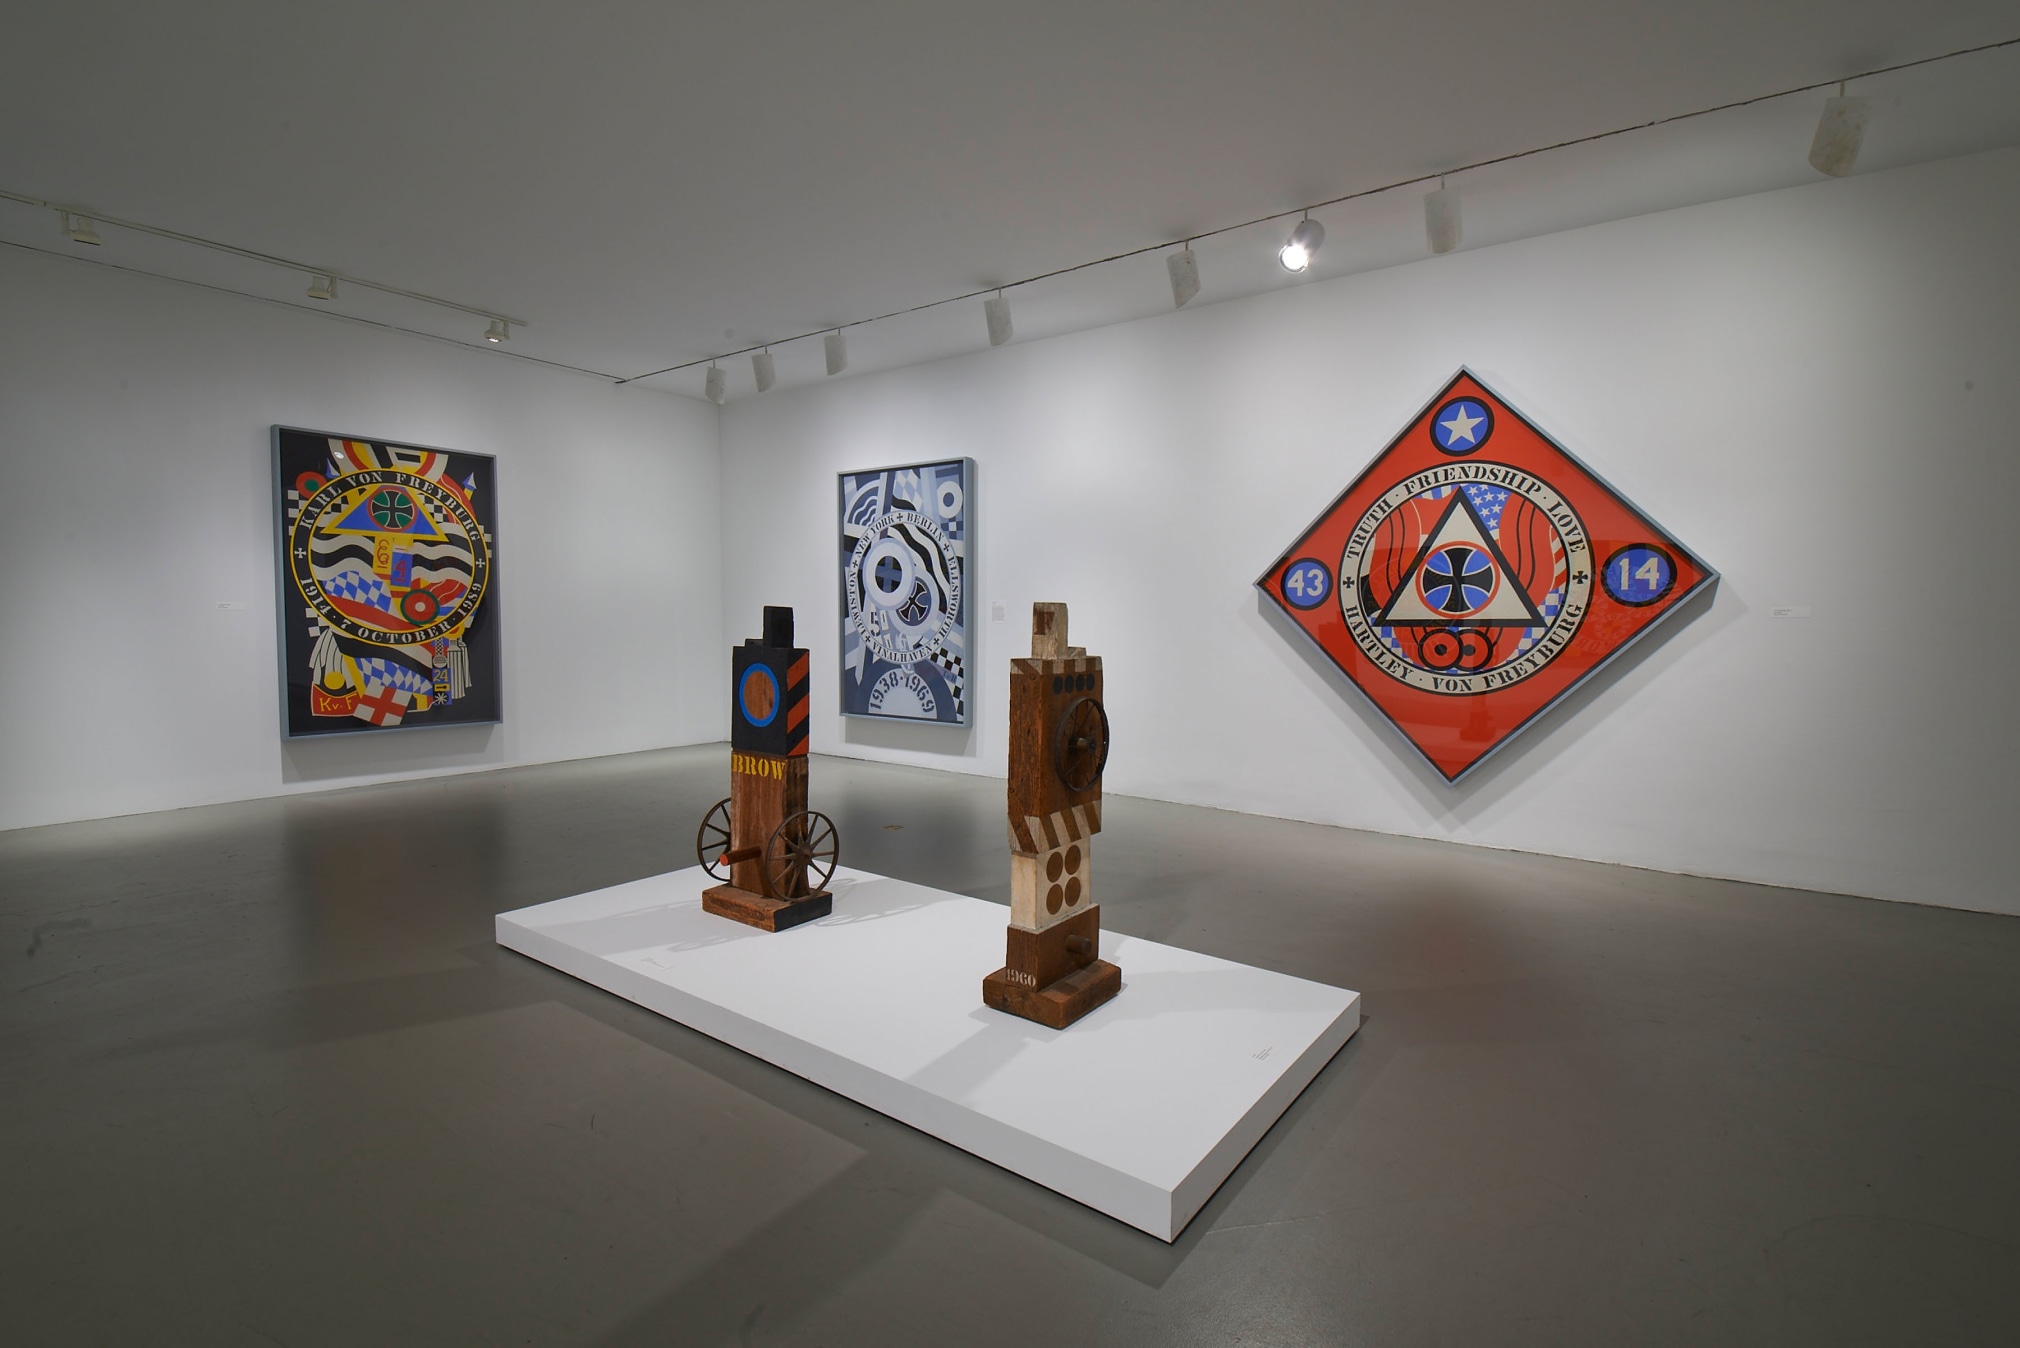 Installation view of Robert Indiana: Beyond LOVE, Whitney Museum of American Art, New York, September 26, 2013&ndash;January 5, 2014. Left to right, KvF I (Hartley Elegy) (1989&ndash;94), Brow (1960&ndash;62), Kvf IV (Hartley Elegy) (1989&ndash;94), M (1960), and KvF X (Hartley Elegy) (1989&ndash;94), &nbsp;